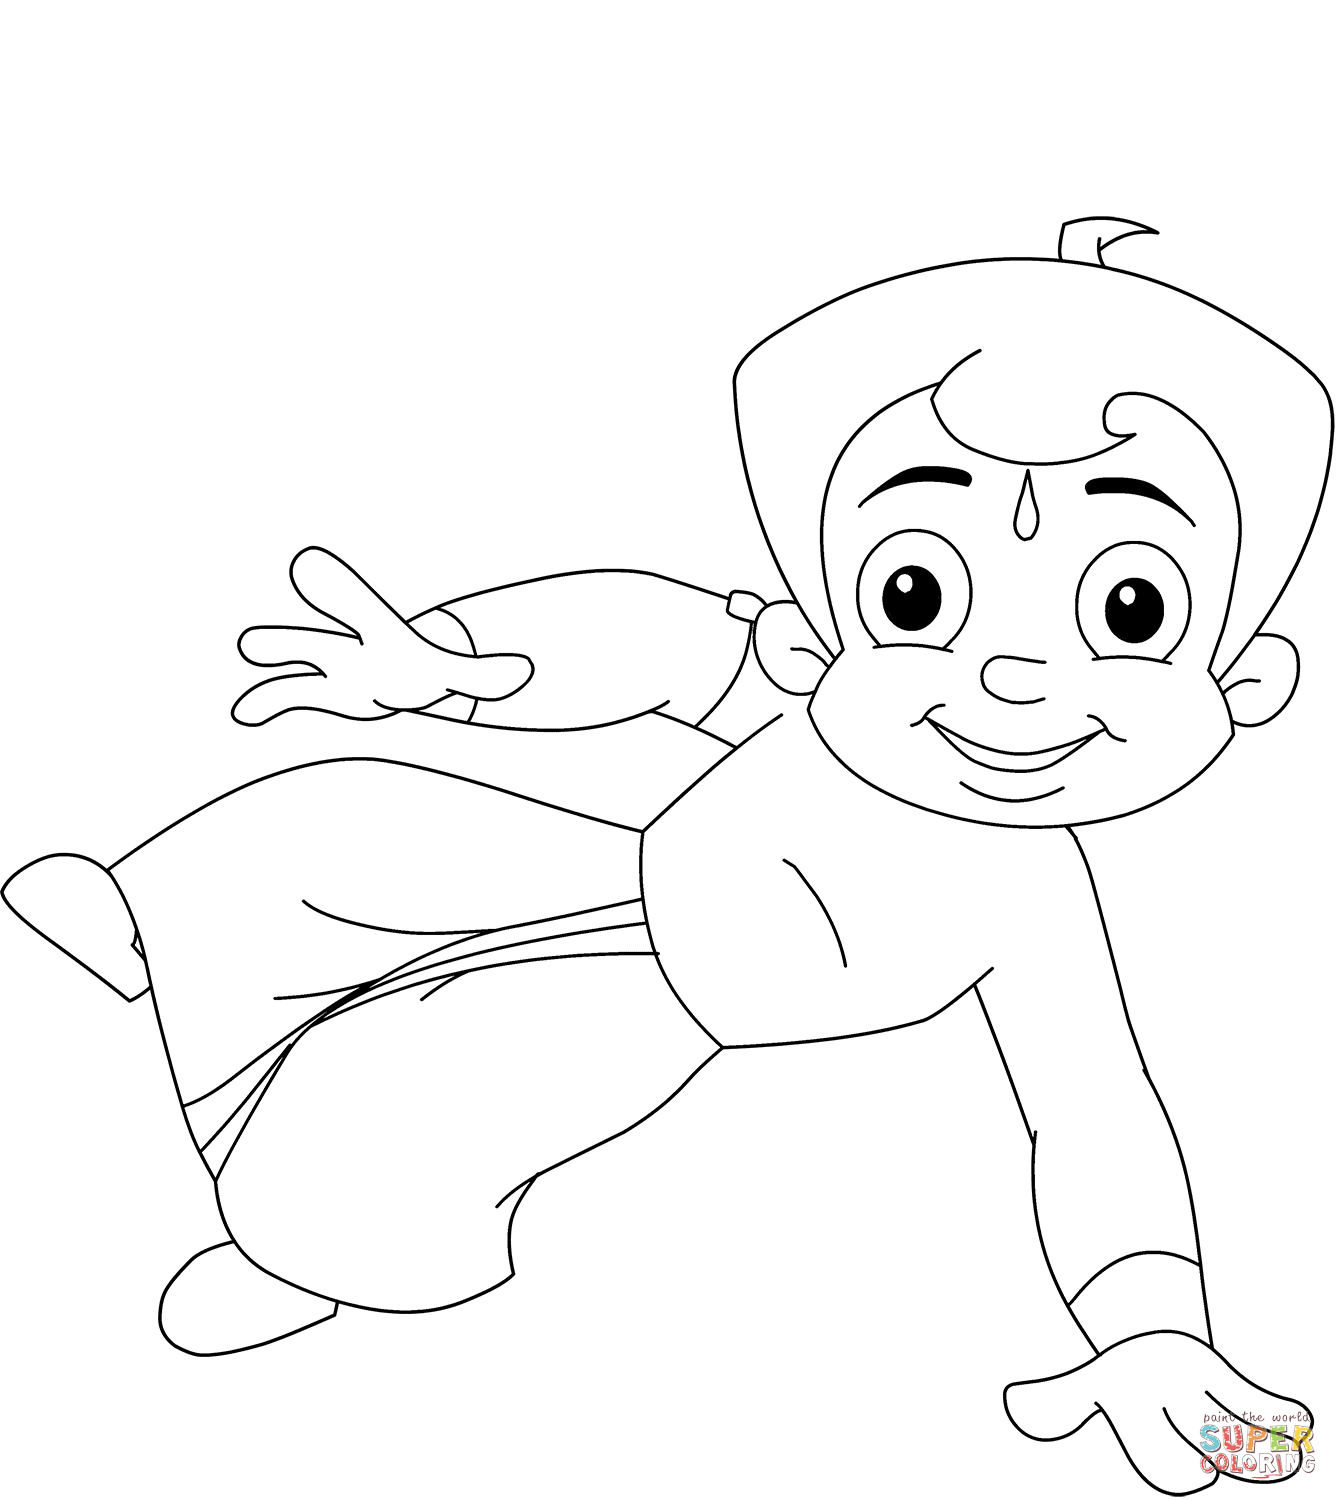 Chhota Bheem Coloring Page | Free Printable Coloring Pages - Coloring Home